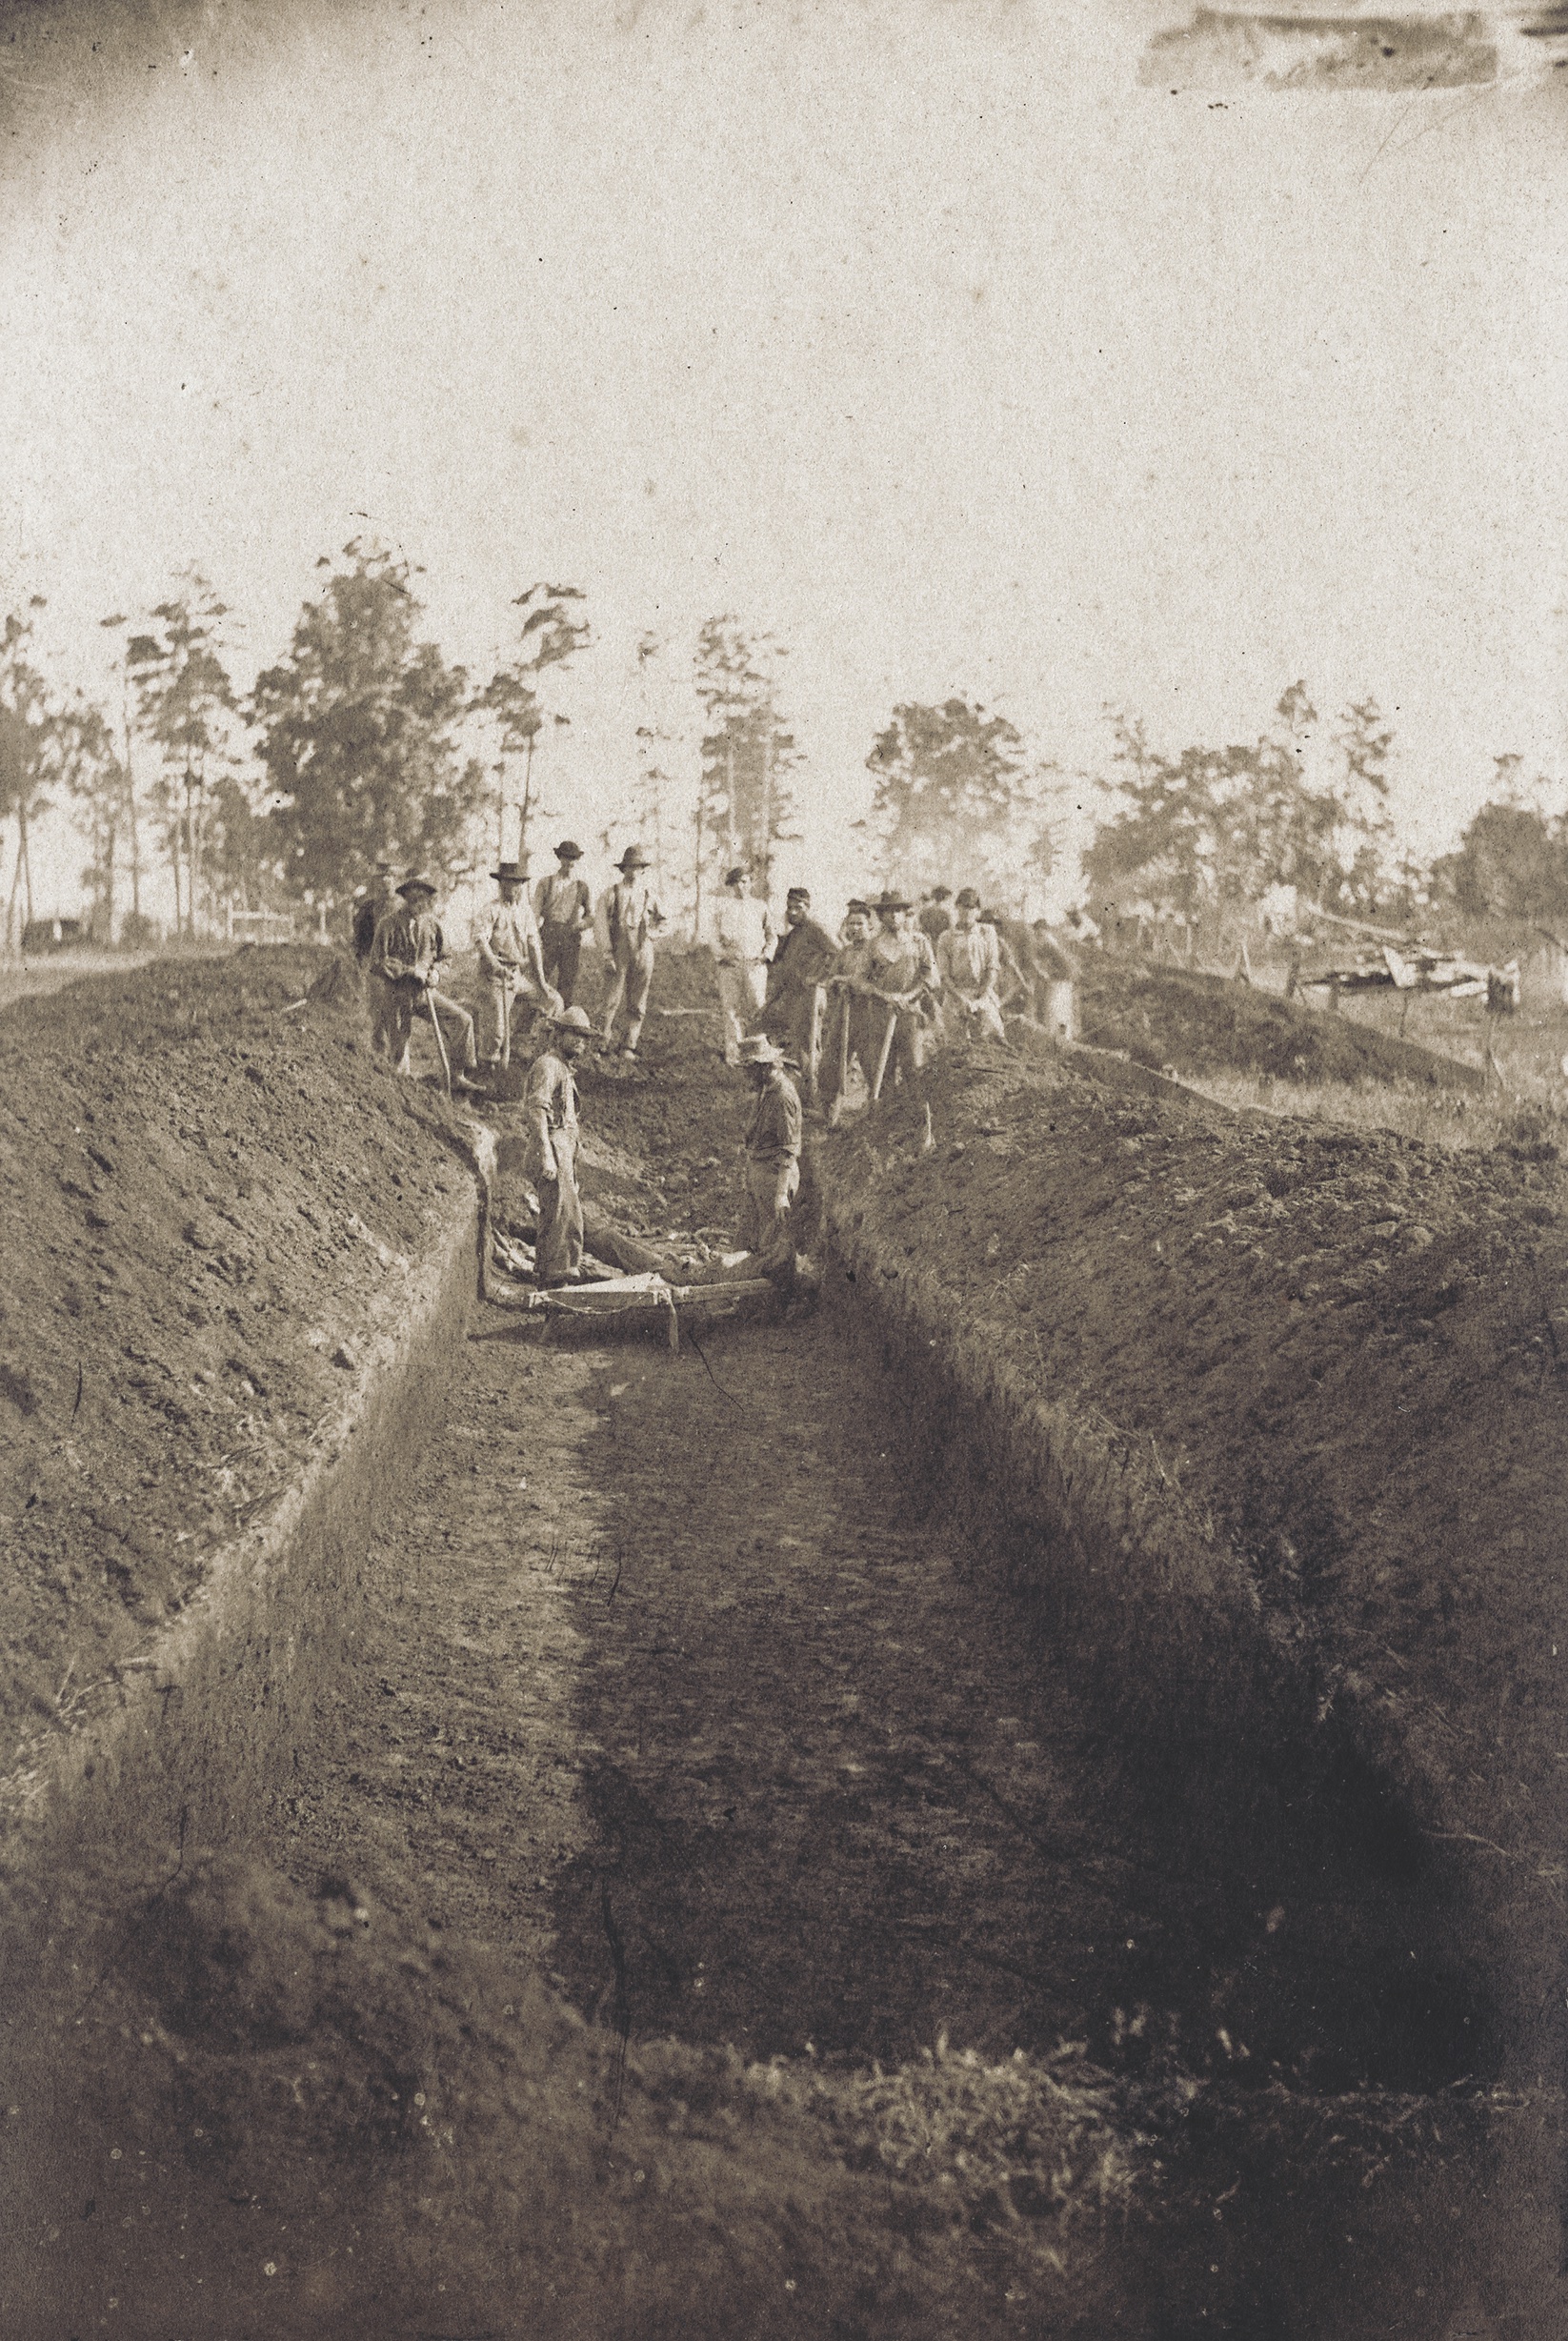 Union prisoners of war bury some of their own in a trench at Andersonville in 1864. (Library of Congress)